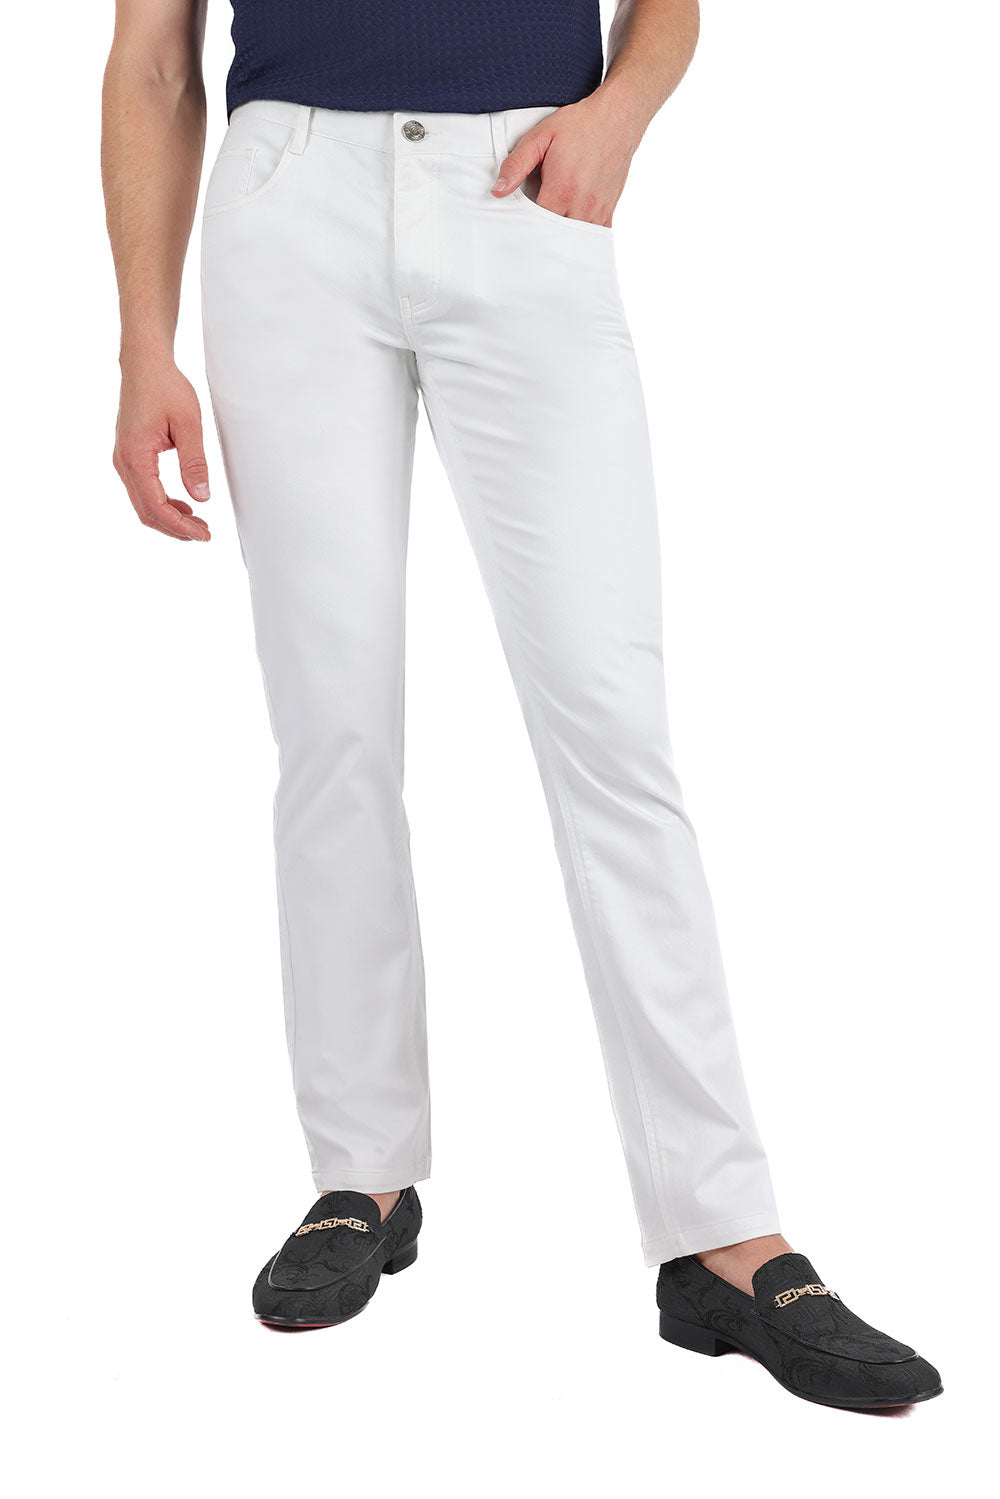 Barabas Men's Solid Color Basic Essential Chino Dress Pants 3CPW30 White